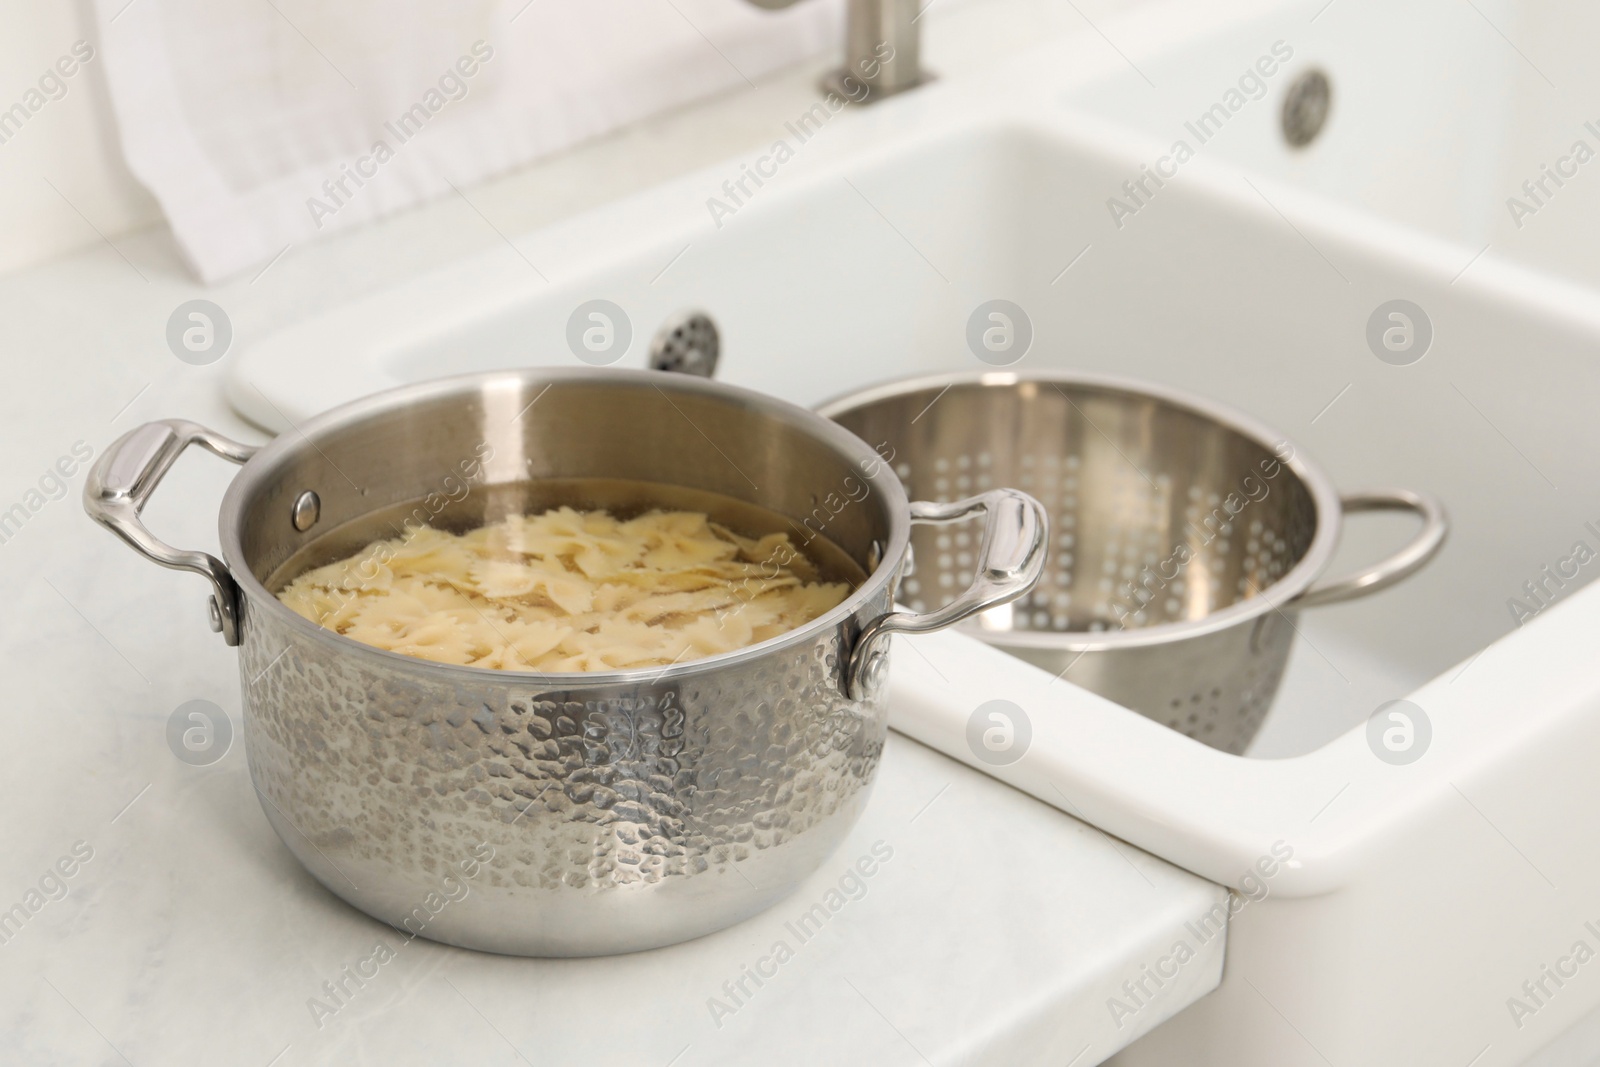 Photo of Cooked pasta in metal pot on countertop near sink